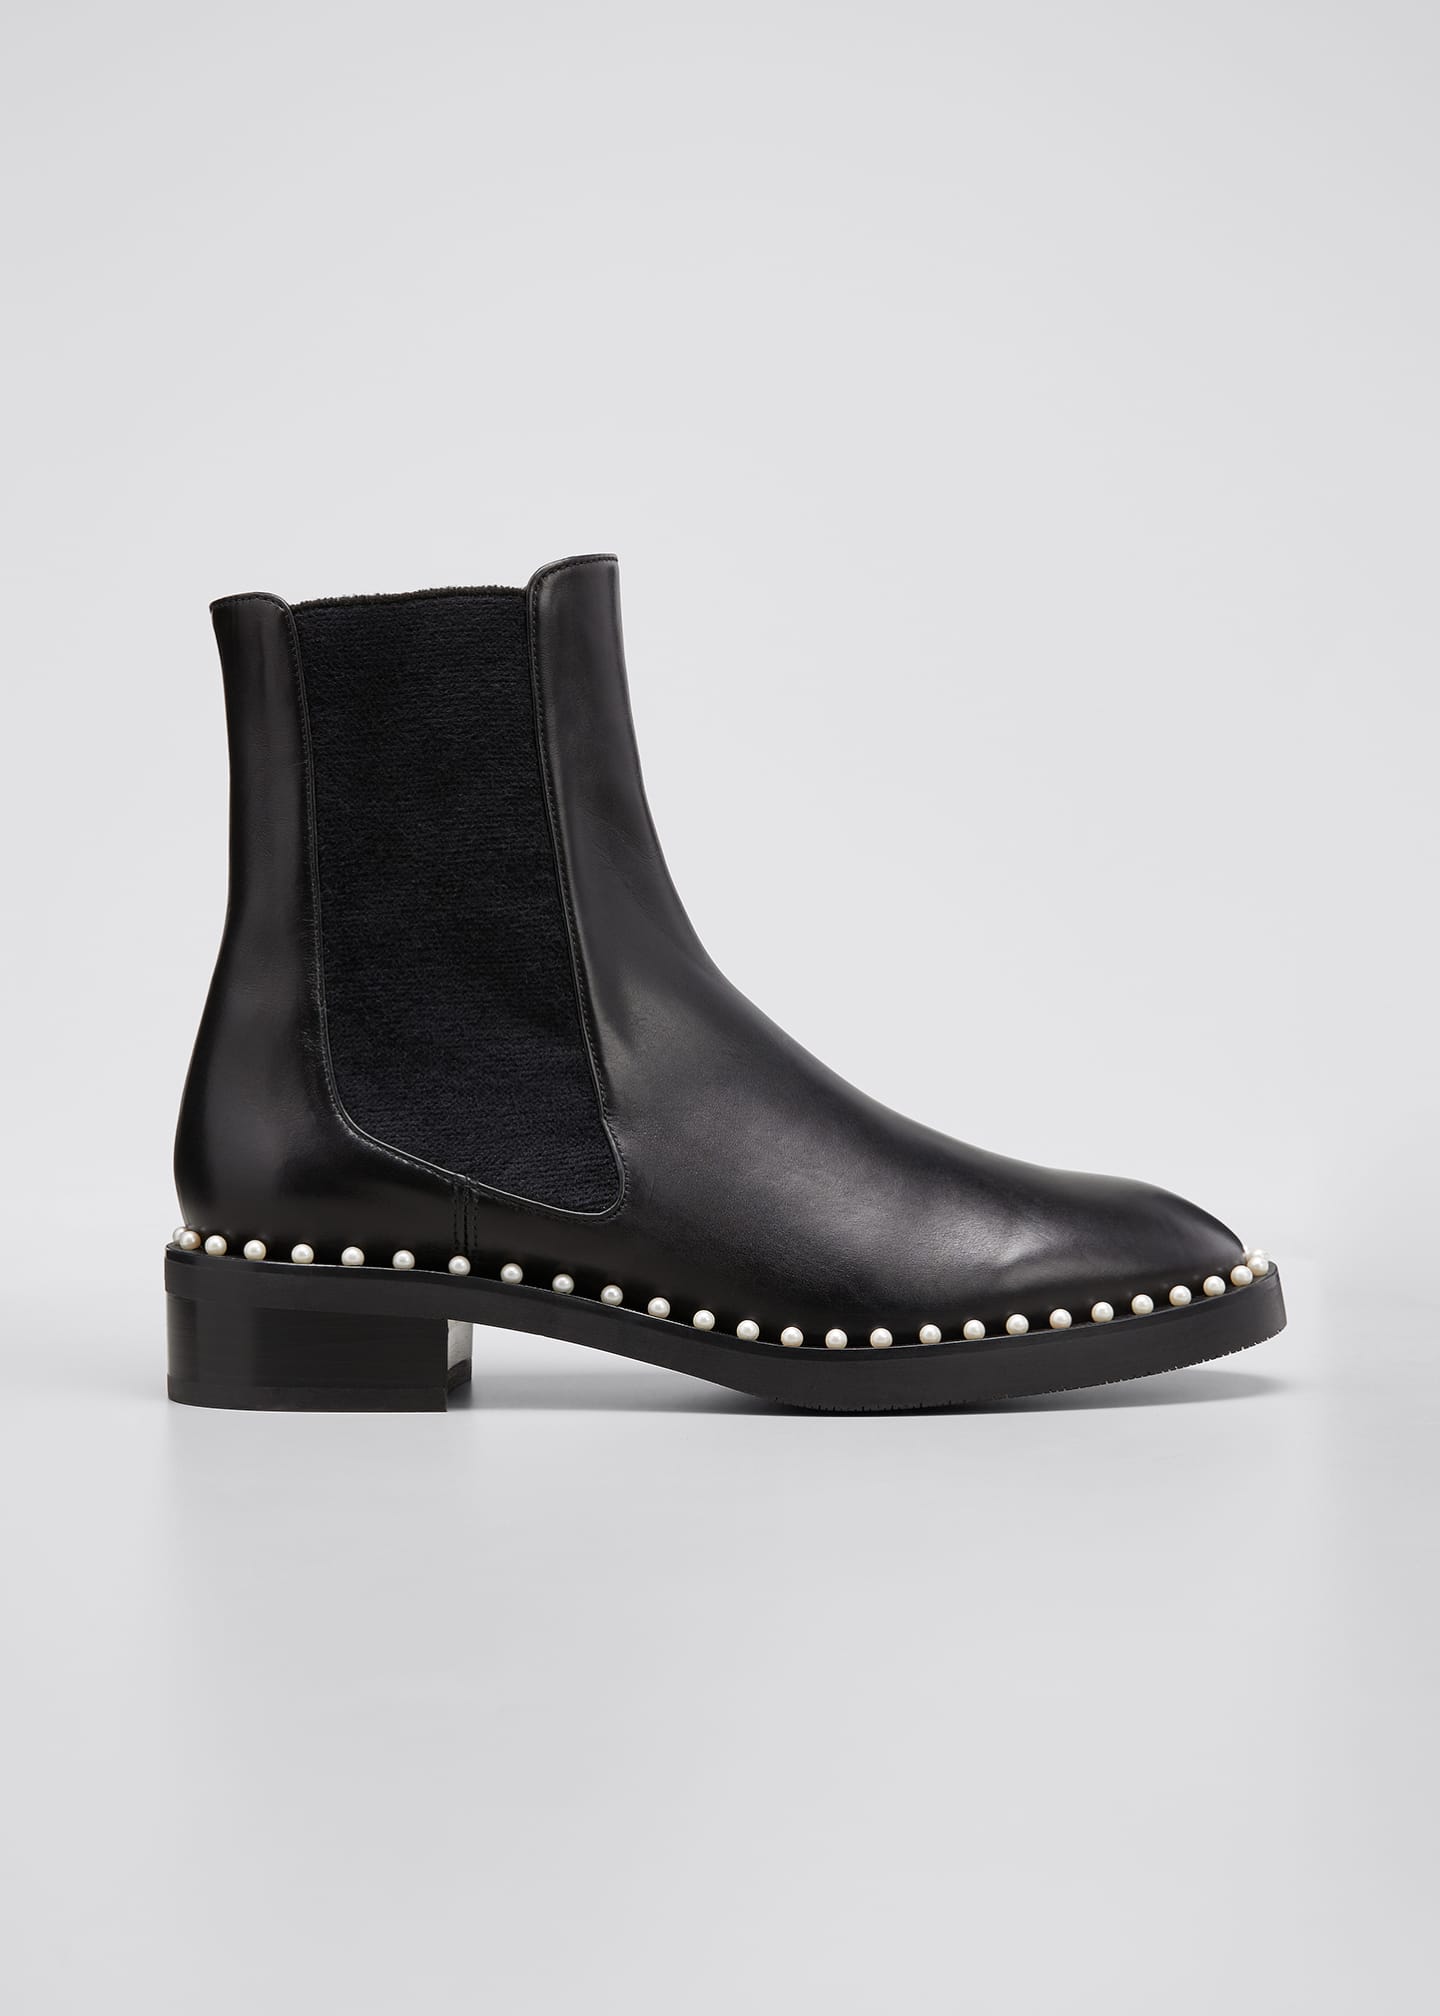 Stuart Weitzman Cline Pearly Studded Leather Chelsea Booties - Bergdorf